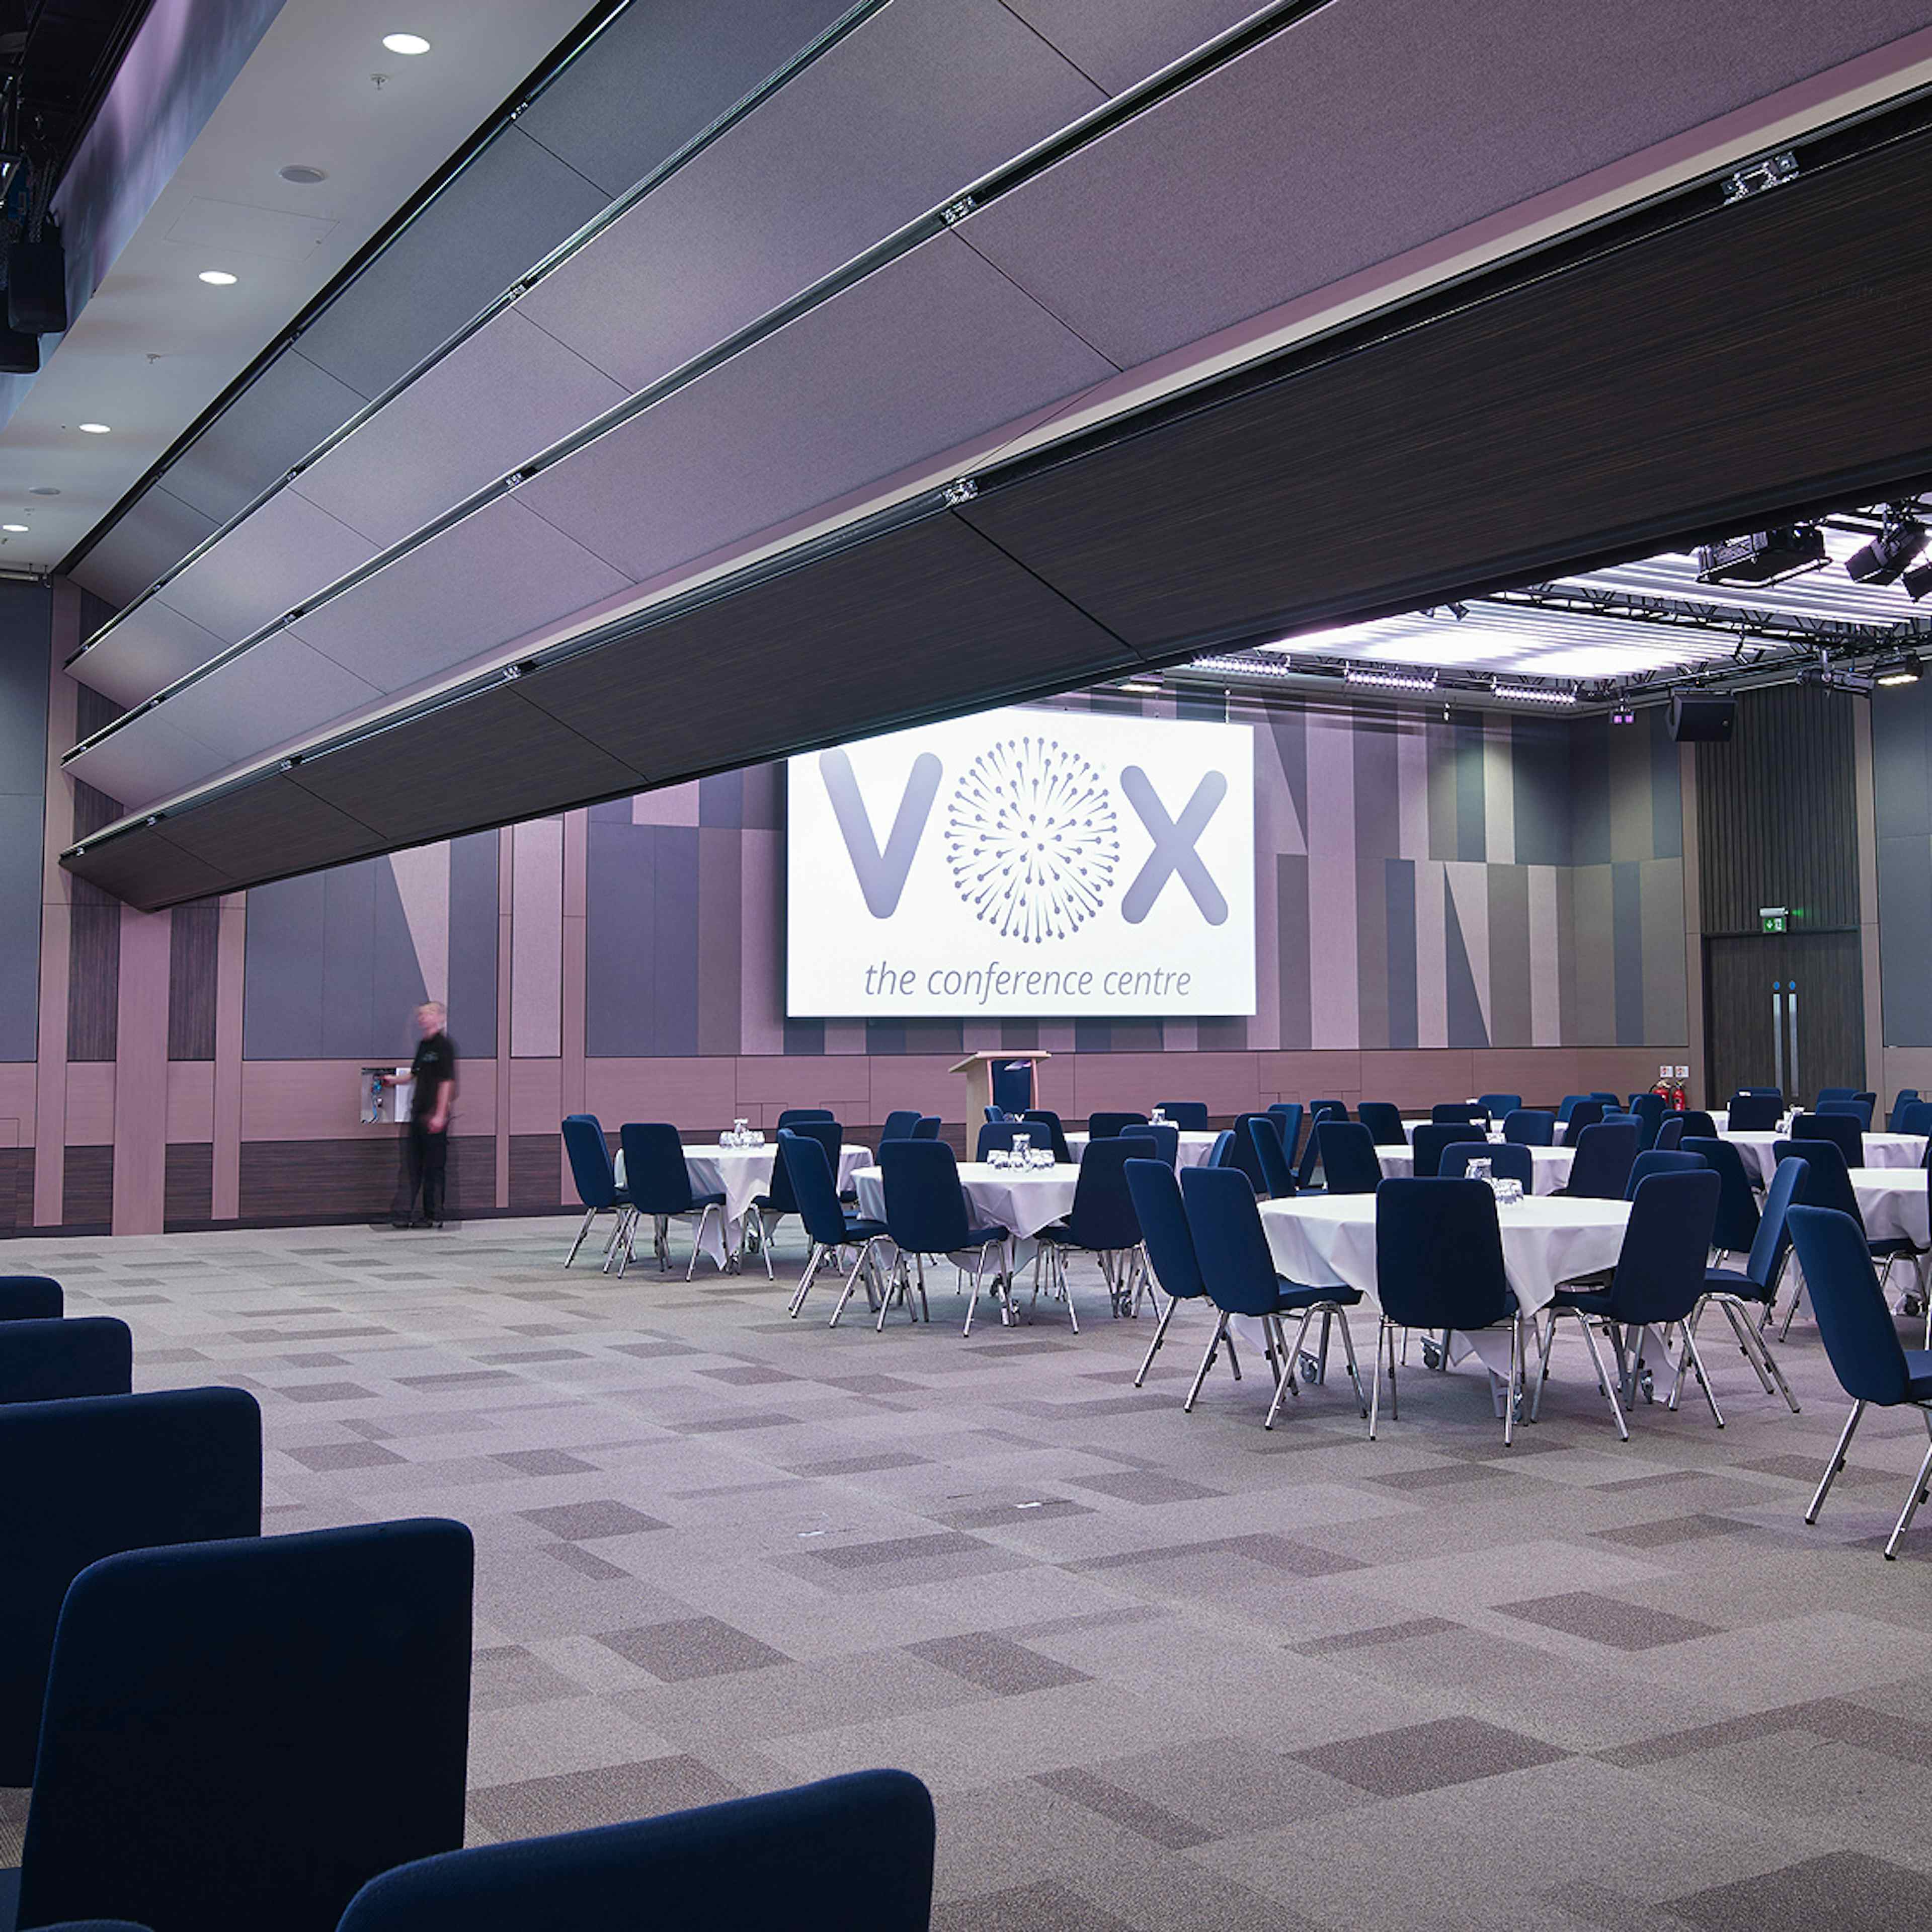 The Vox Conference Centre - Vox 3 4 5  image 2